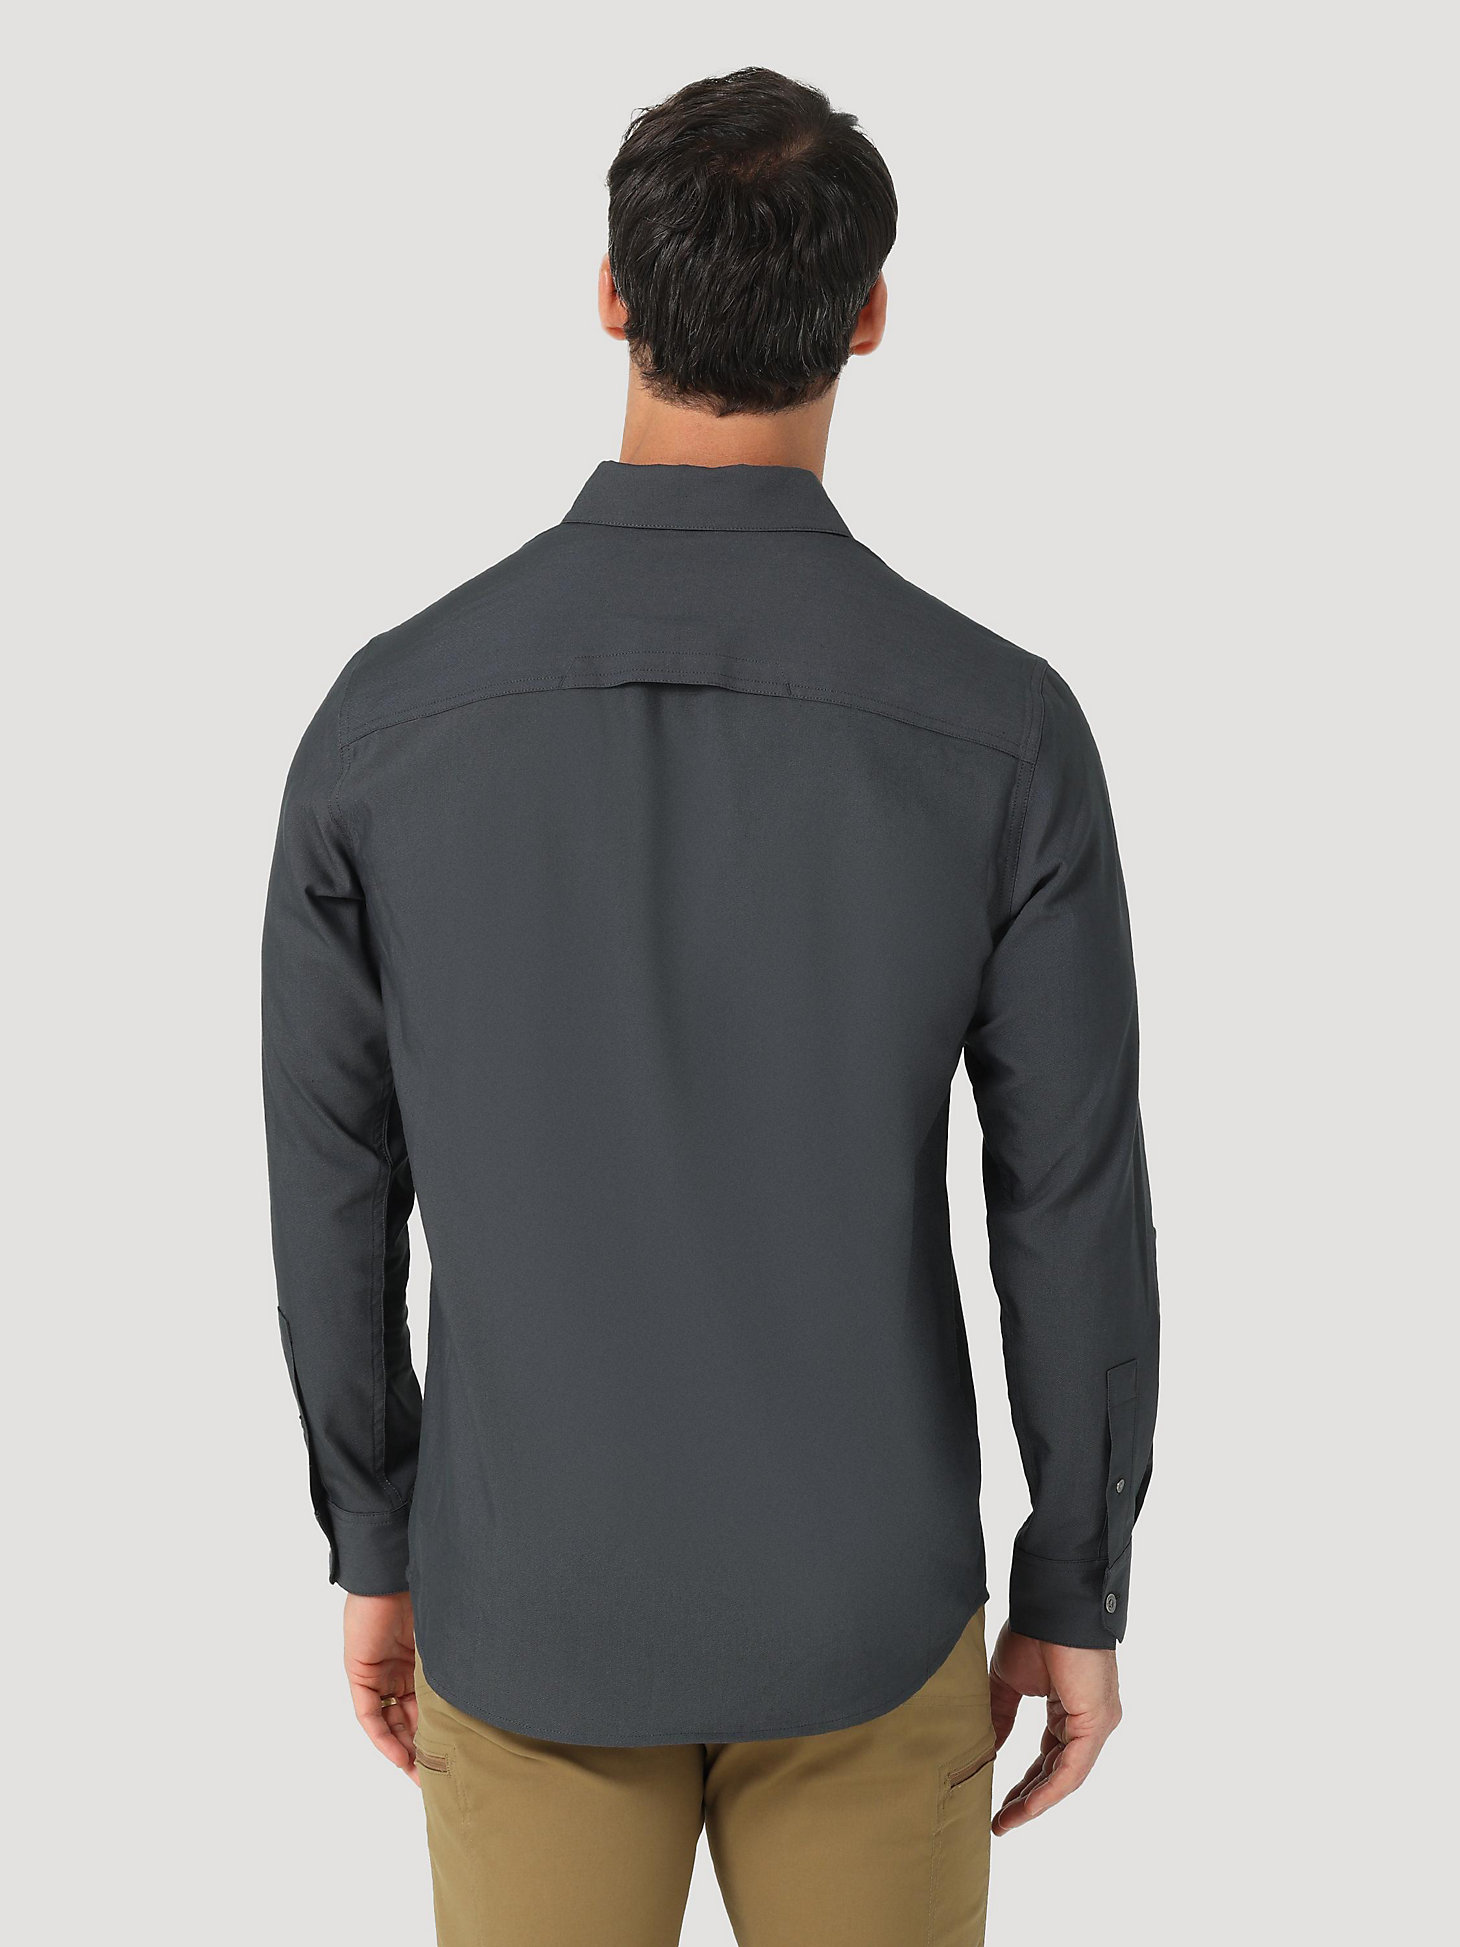 Men's Utility Outdoor Shirt in Anthracite alternative view 3